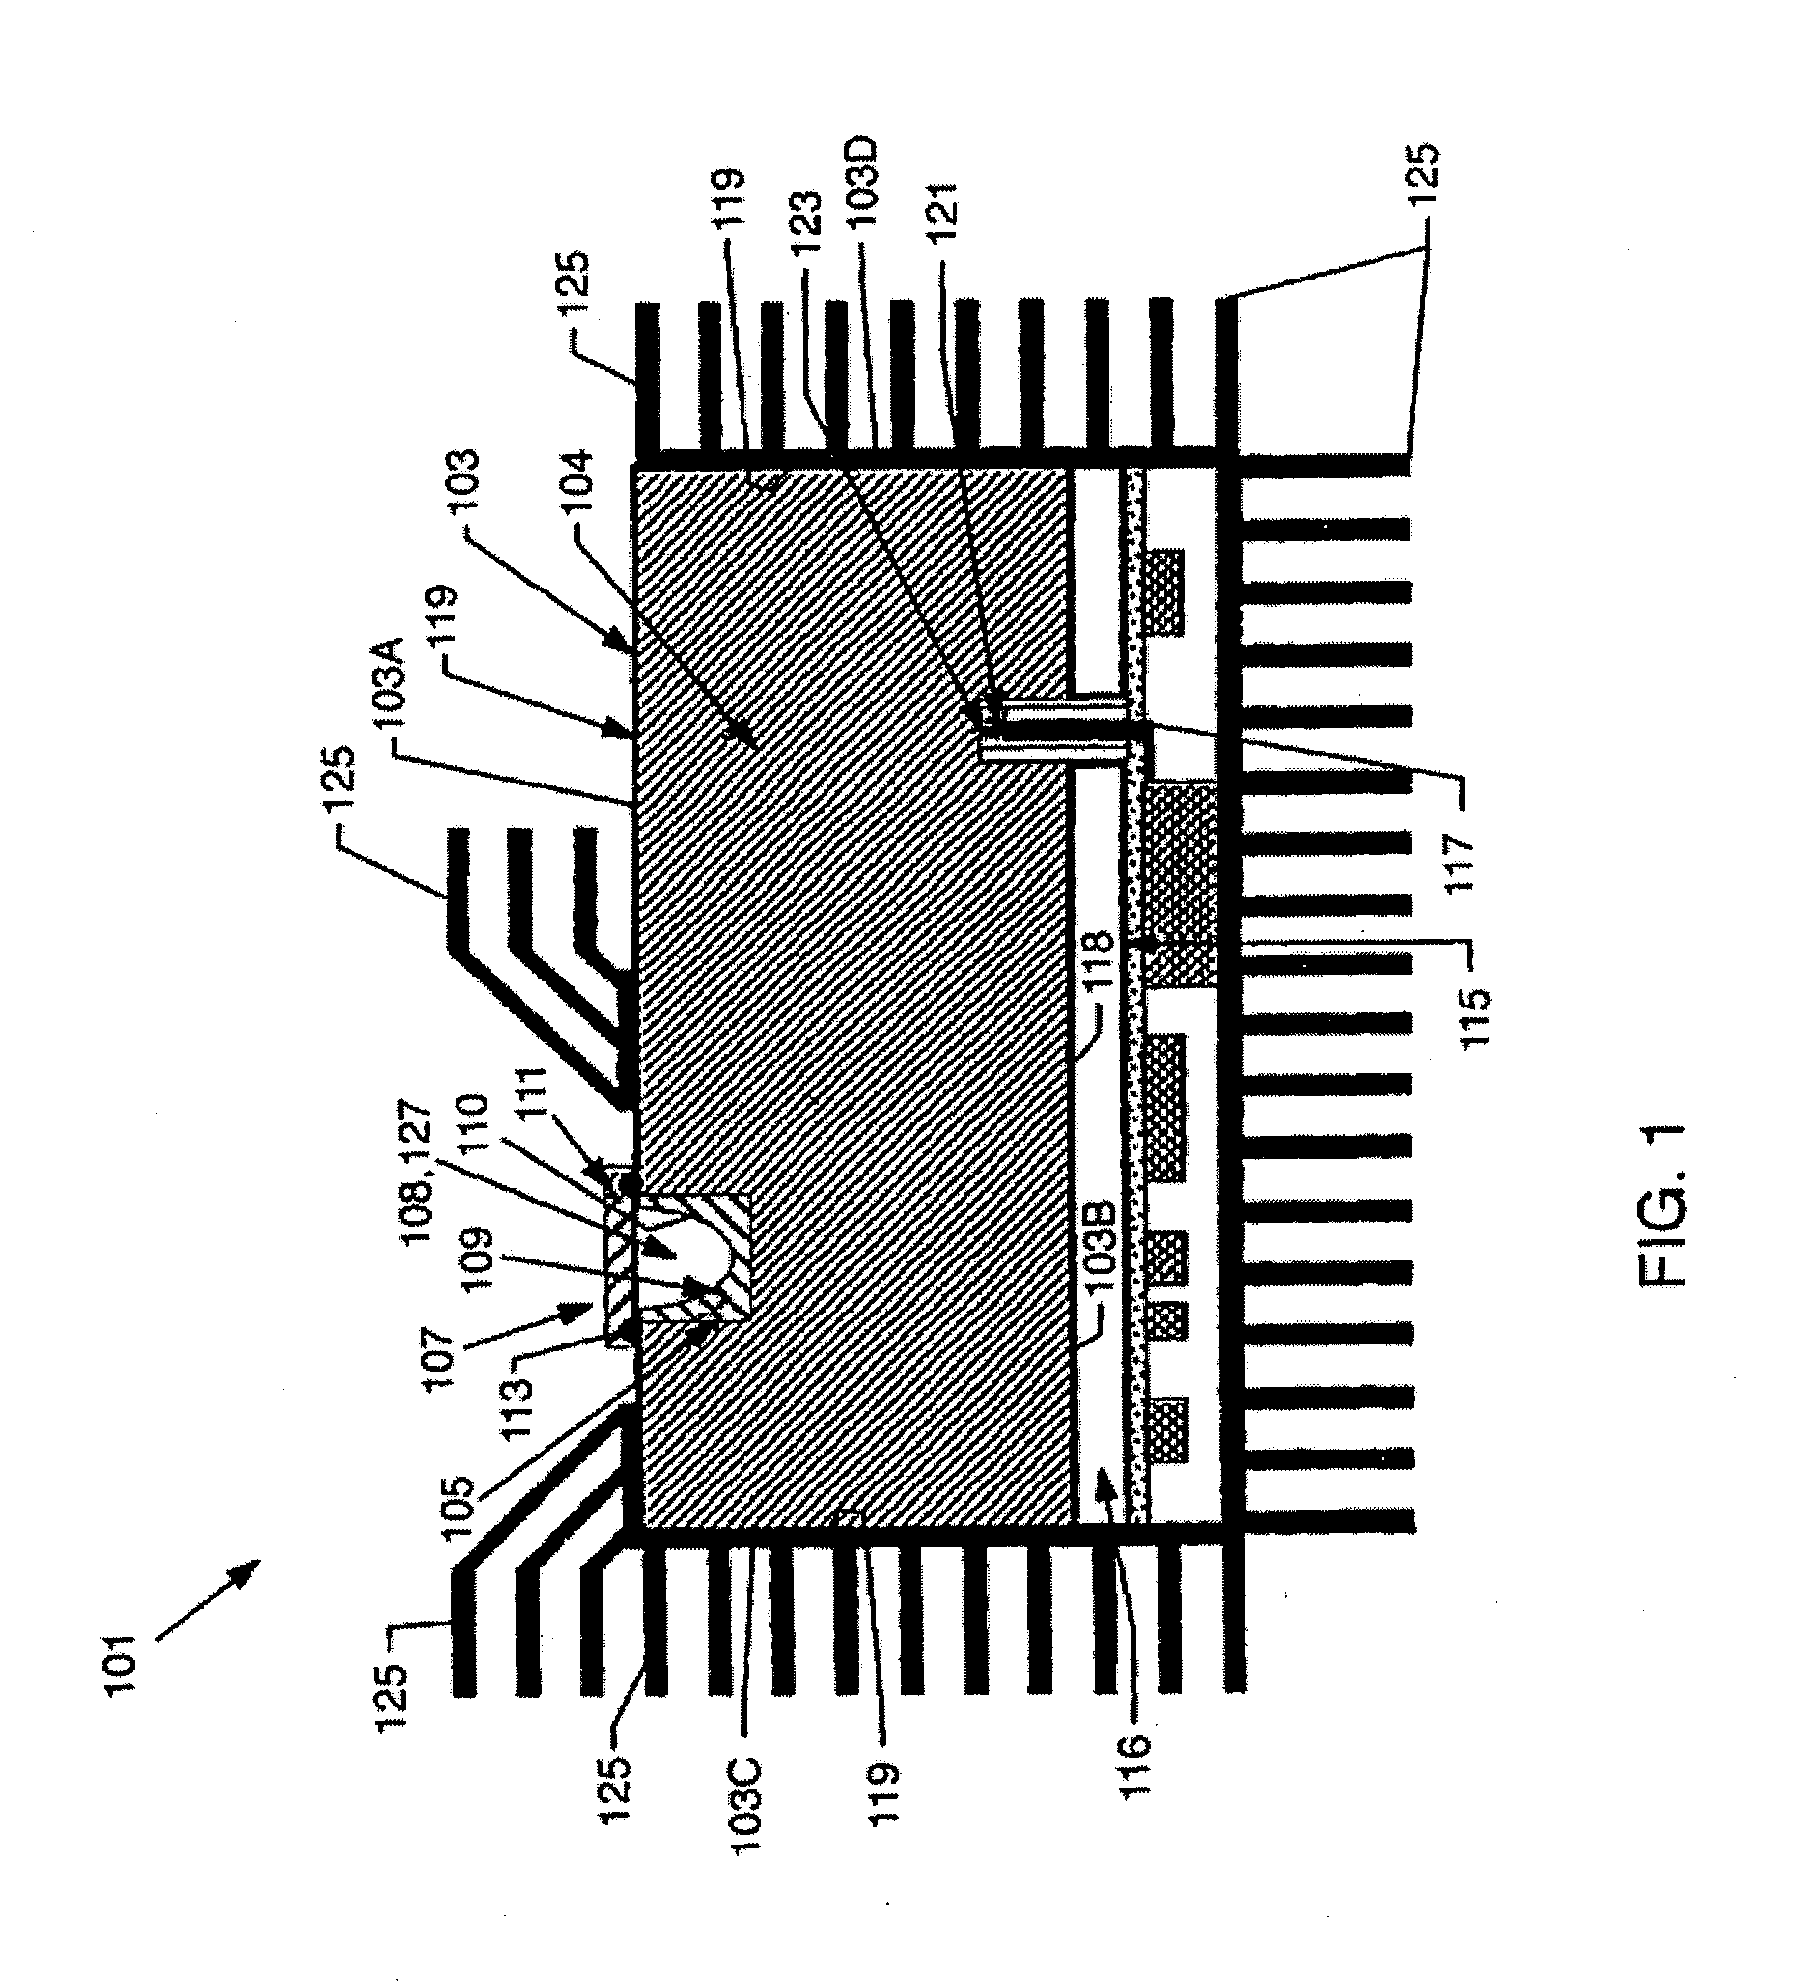 Plasma Lamp with Dielectric Waveguide Body Having Shaped Configuration